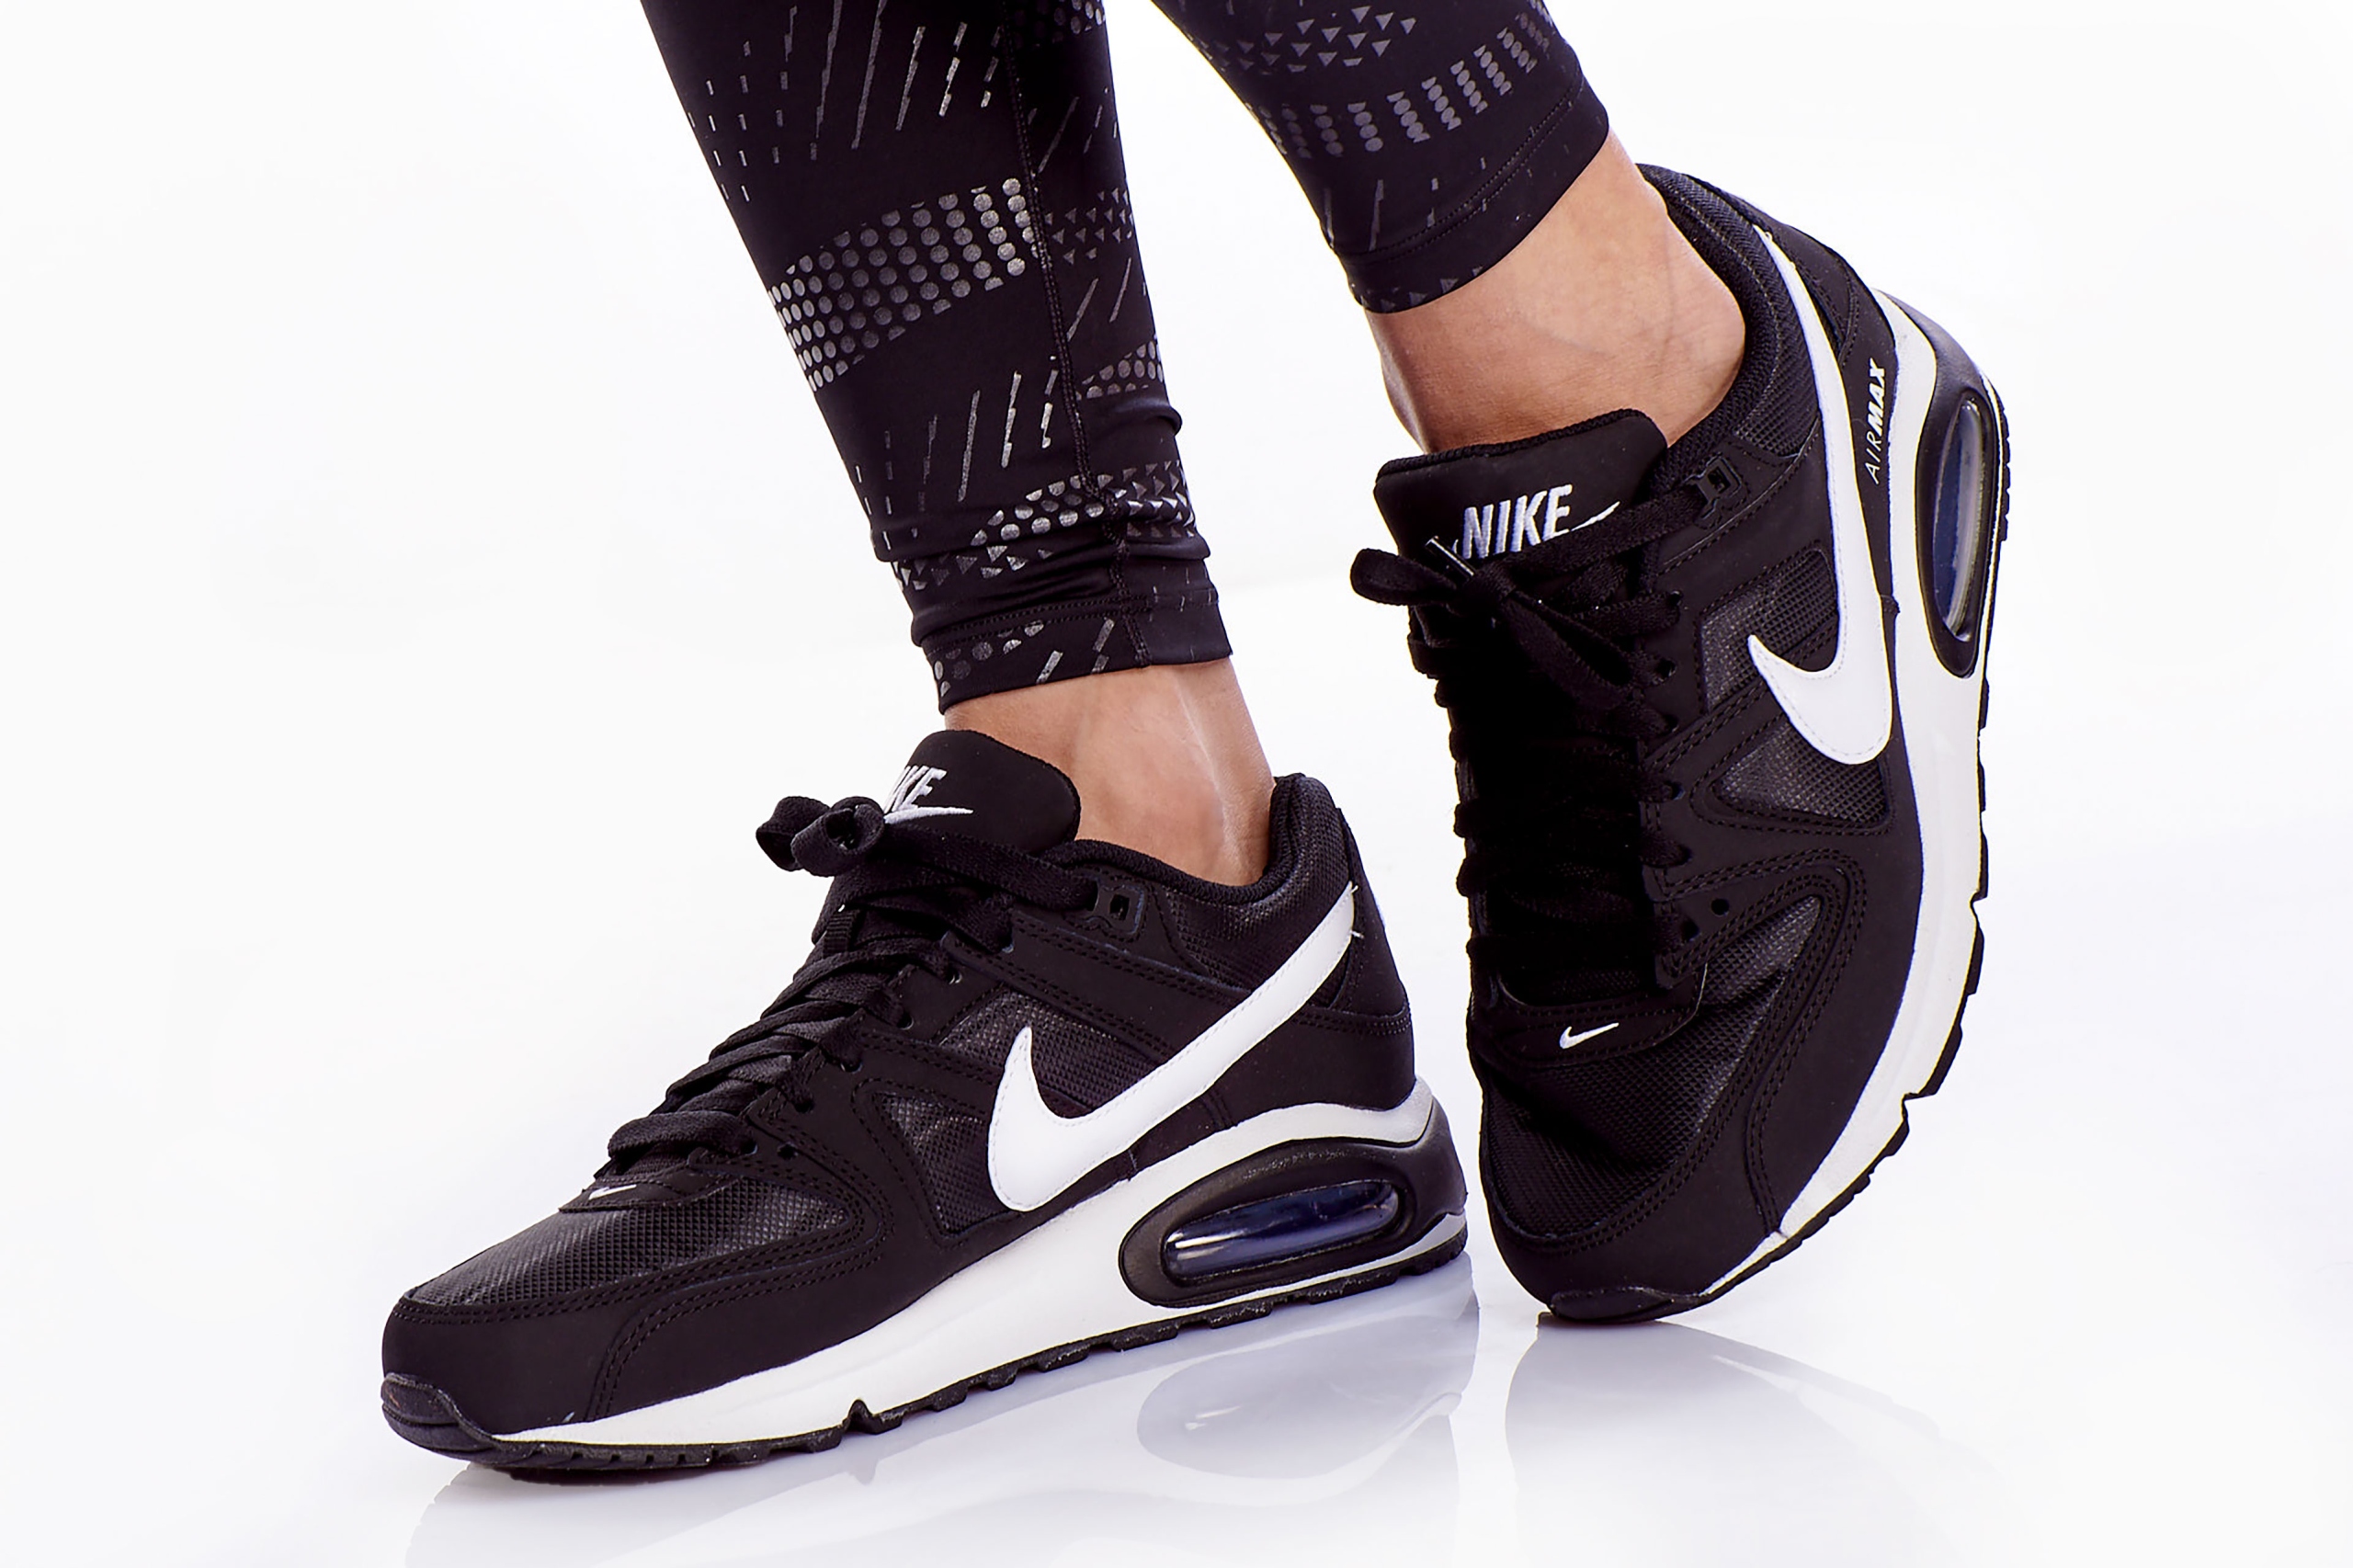 nike thea tanio, heavy deal 72% off - www.ct-trp.org